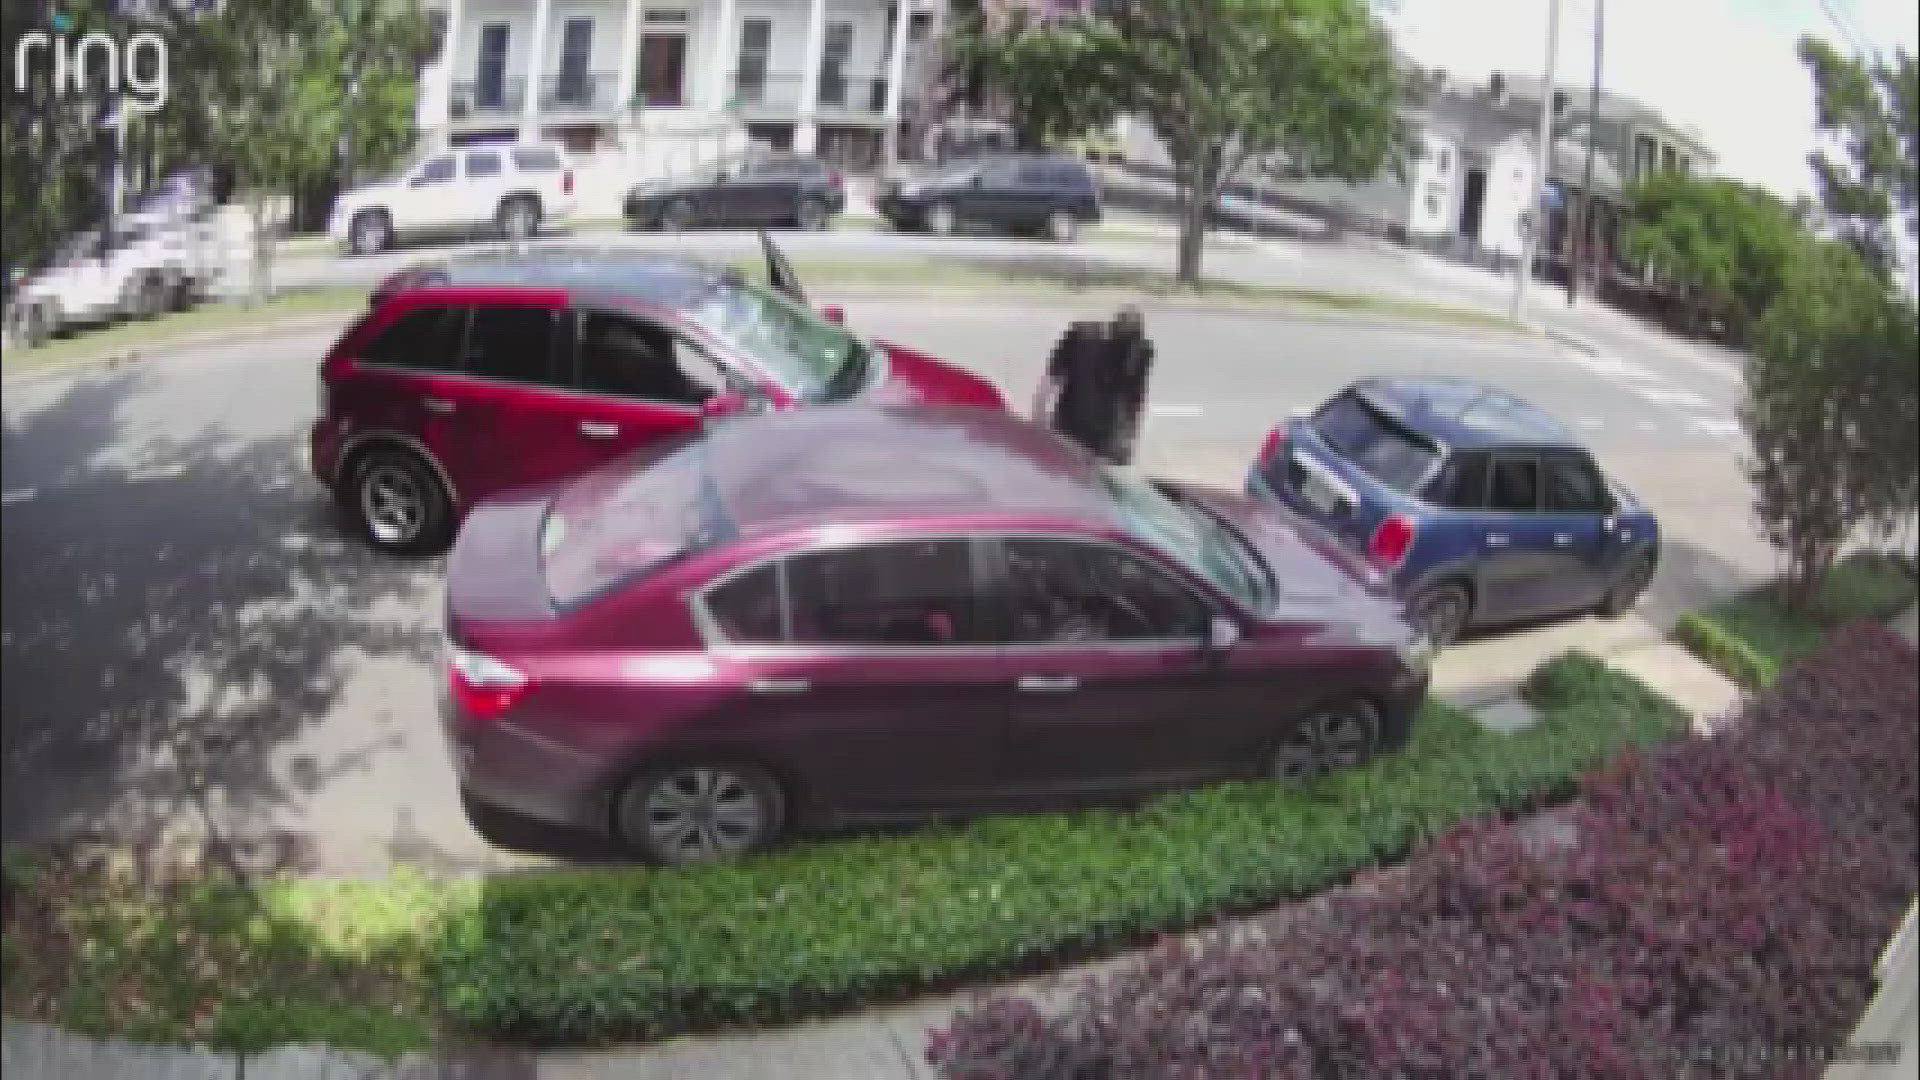 The New Orleans Police Department is asking for help identifying a man who hit a parked car and allegedly drove off. The crash was caught on camera.